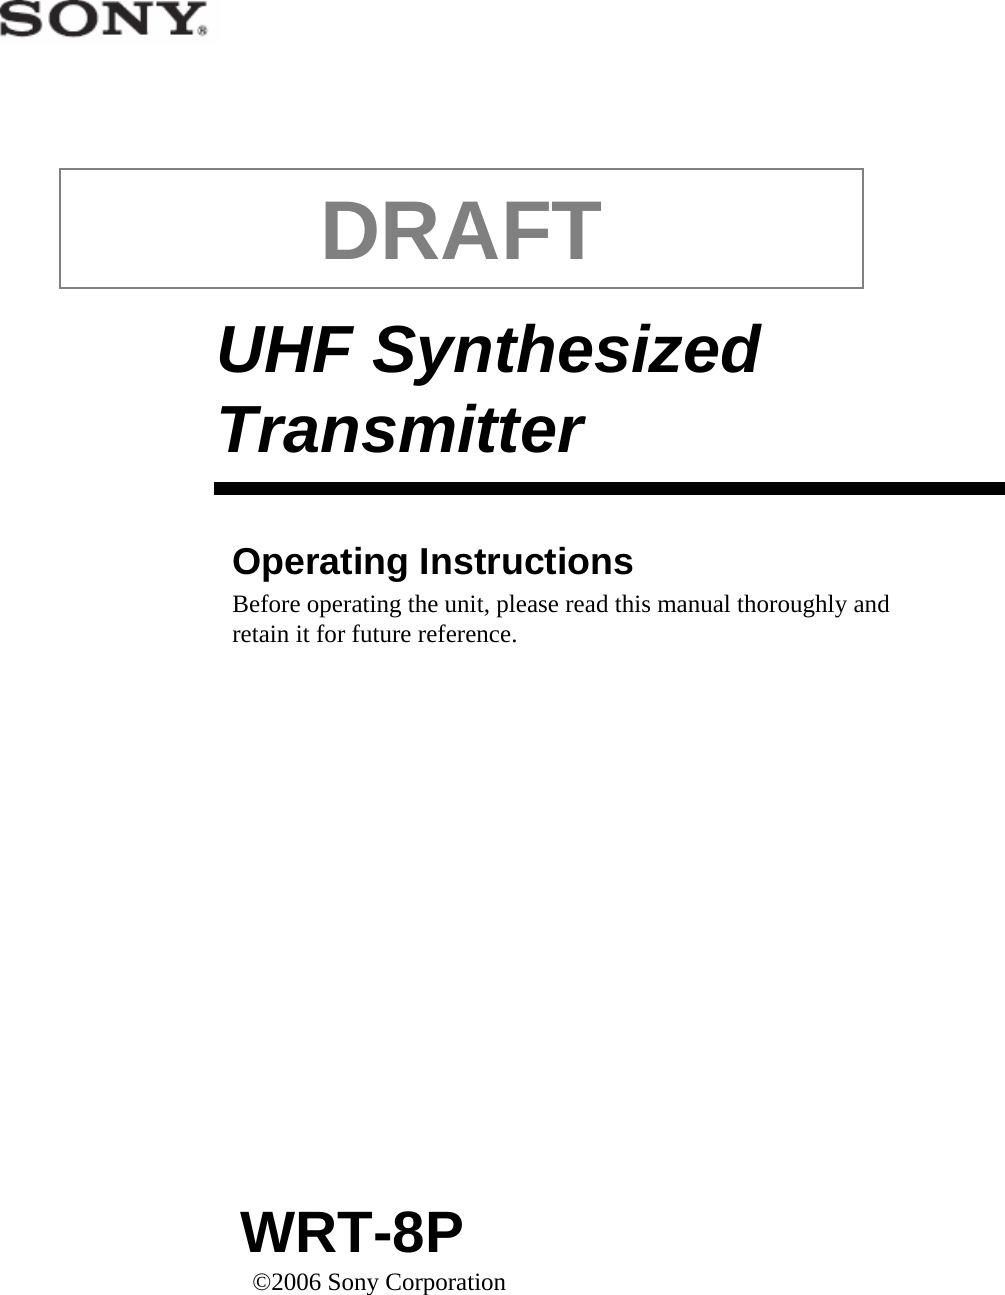 DRAFTUHF Synthesized TransmitterOperating Instructions Before operating the unit, please read this manual thoroughly and retain it for future reference.WRT-8P©2006 Sony Corporation